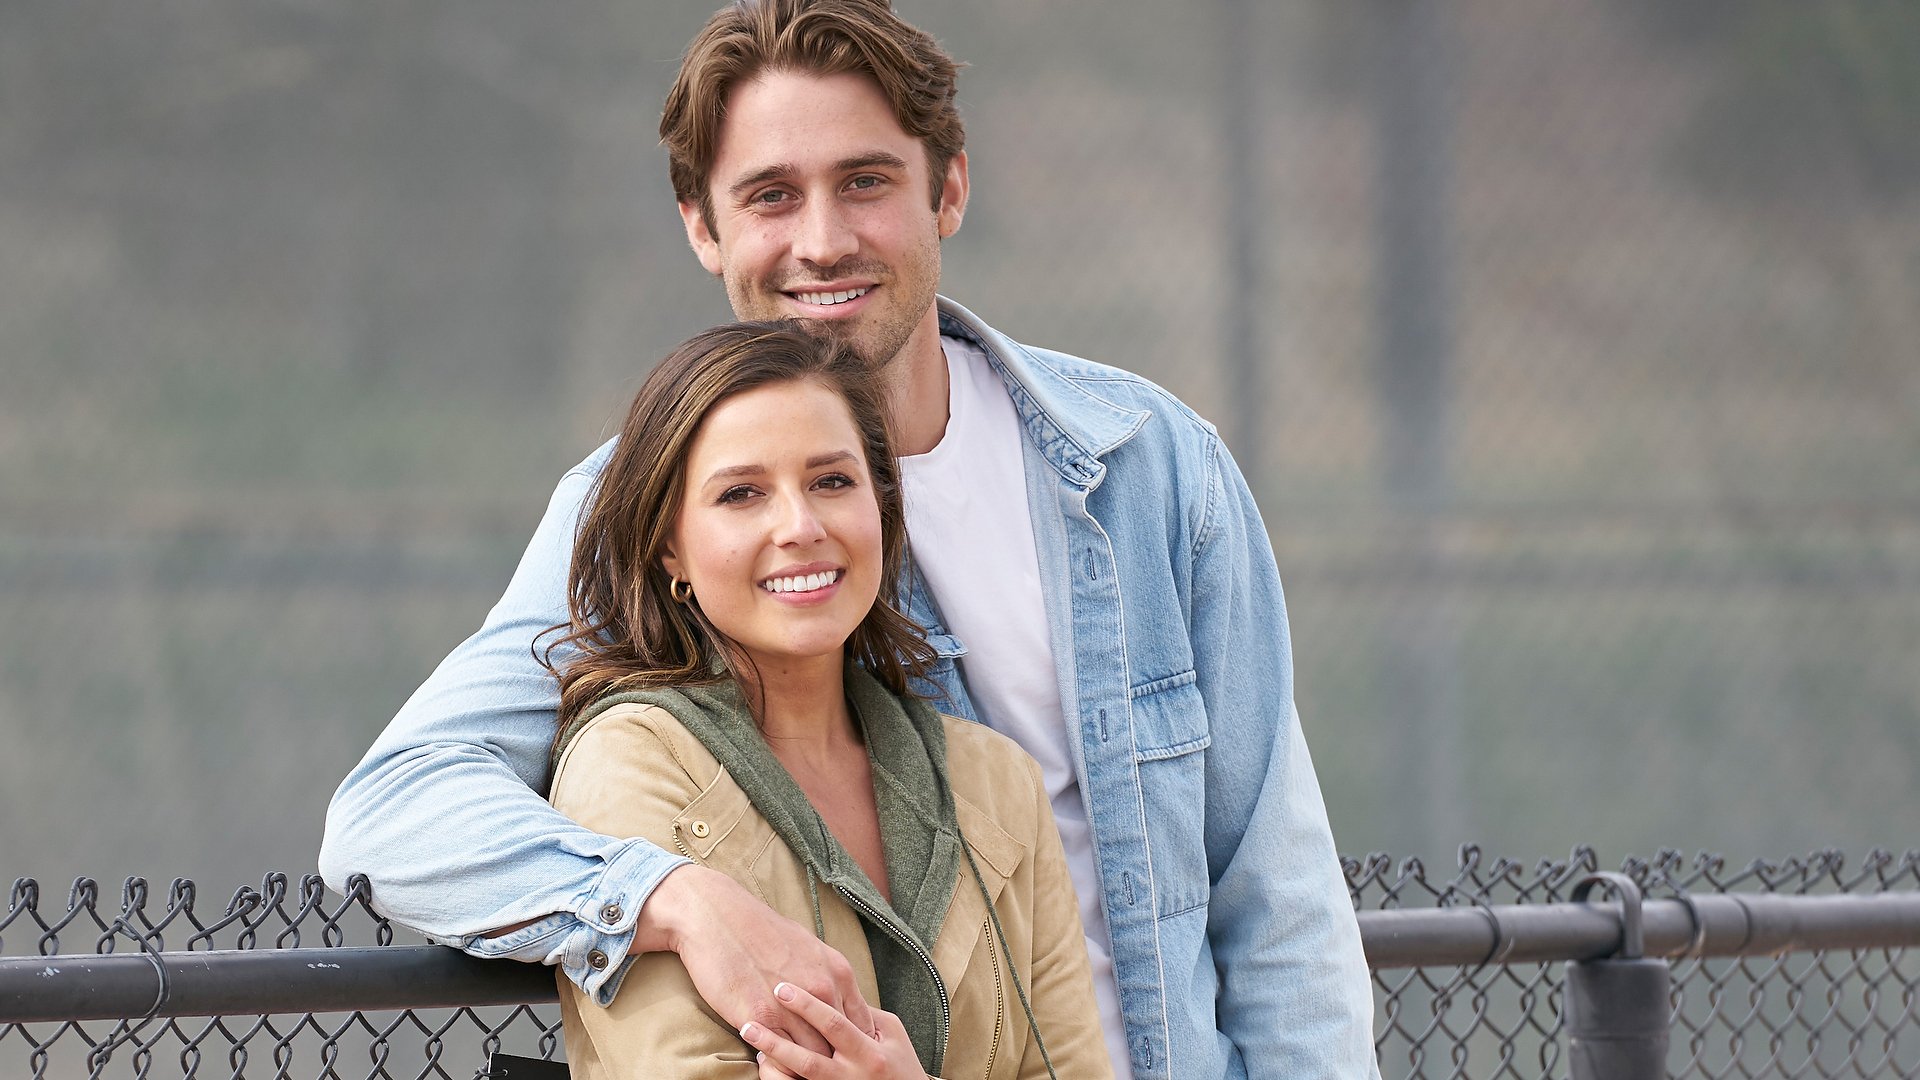 Katie Thurston and Greg Grippo pose together on their Hometown date in ‘The Bachelorette’ Season 17 Week 9